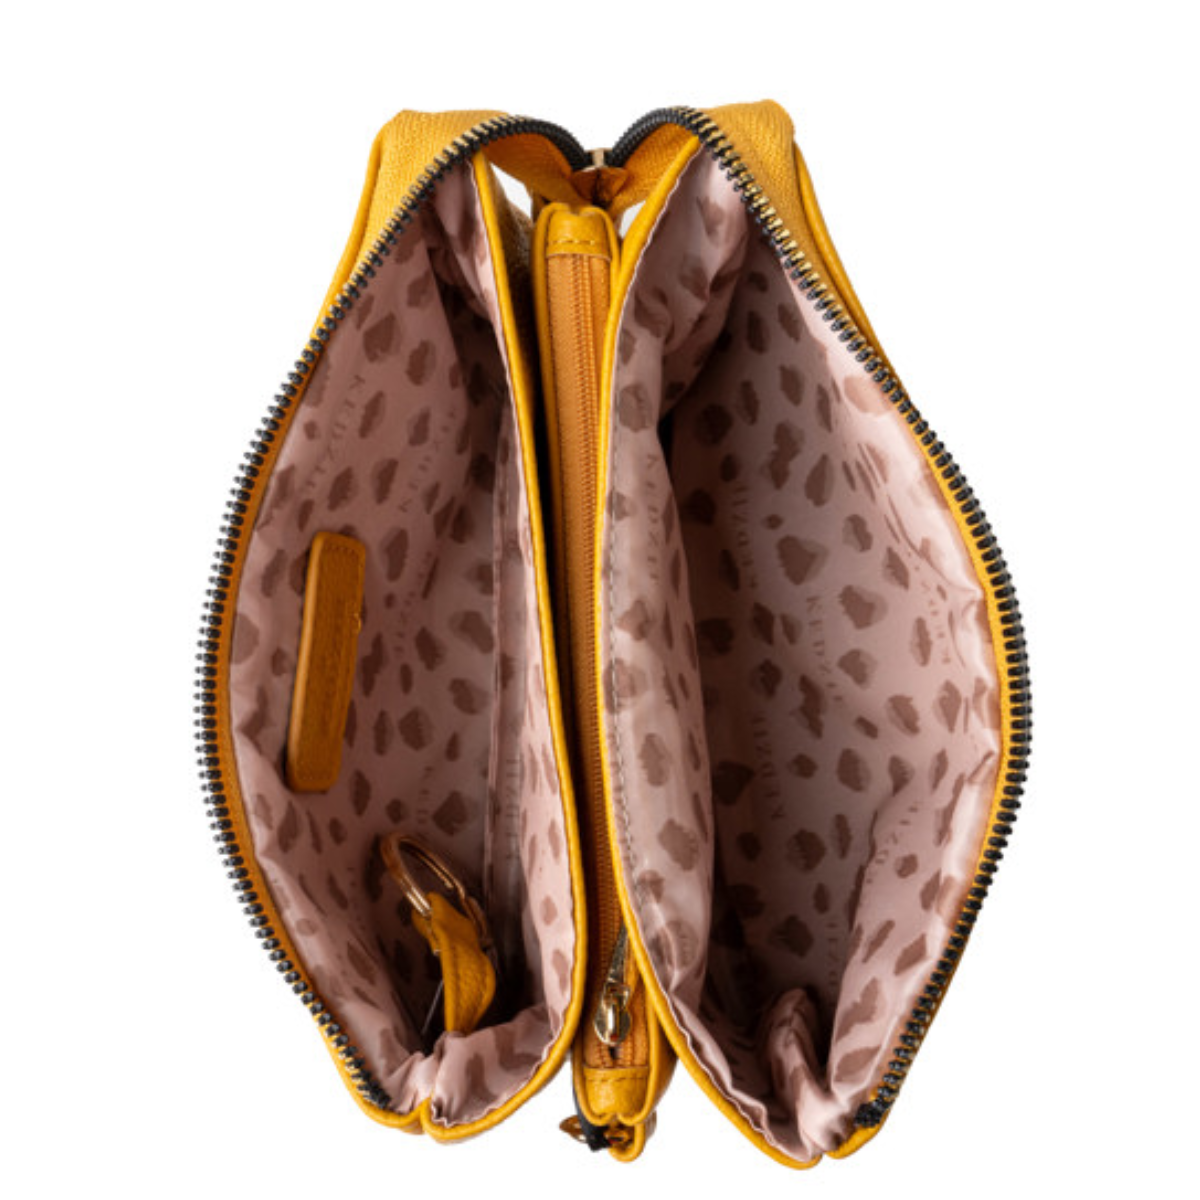 Open empty DM MERCHANDISING INC Convertible Crossbody Wallet/Purse with a leopard print interior, yellow accents, and card slots.